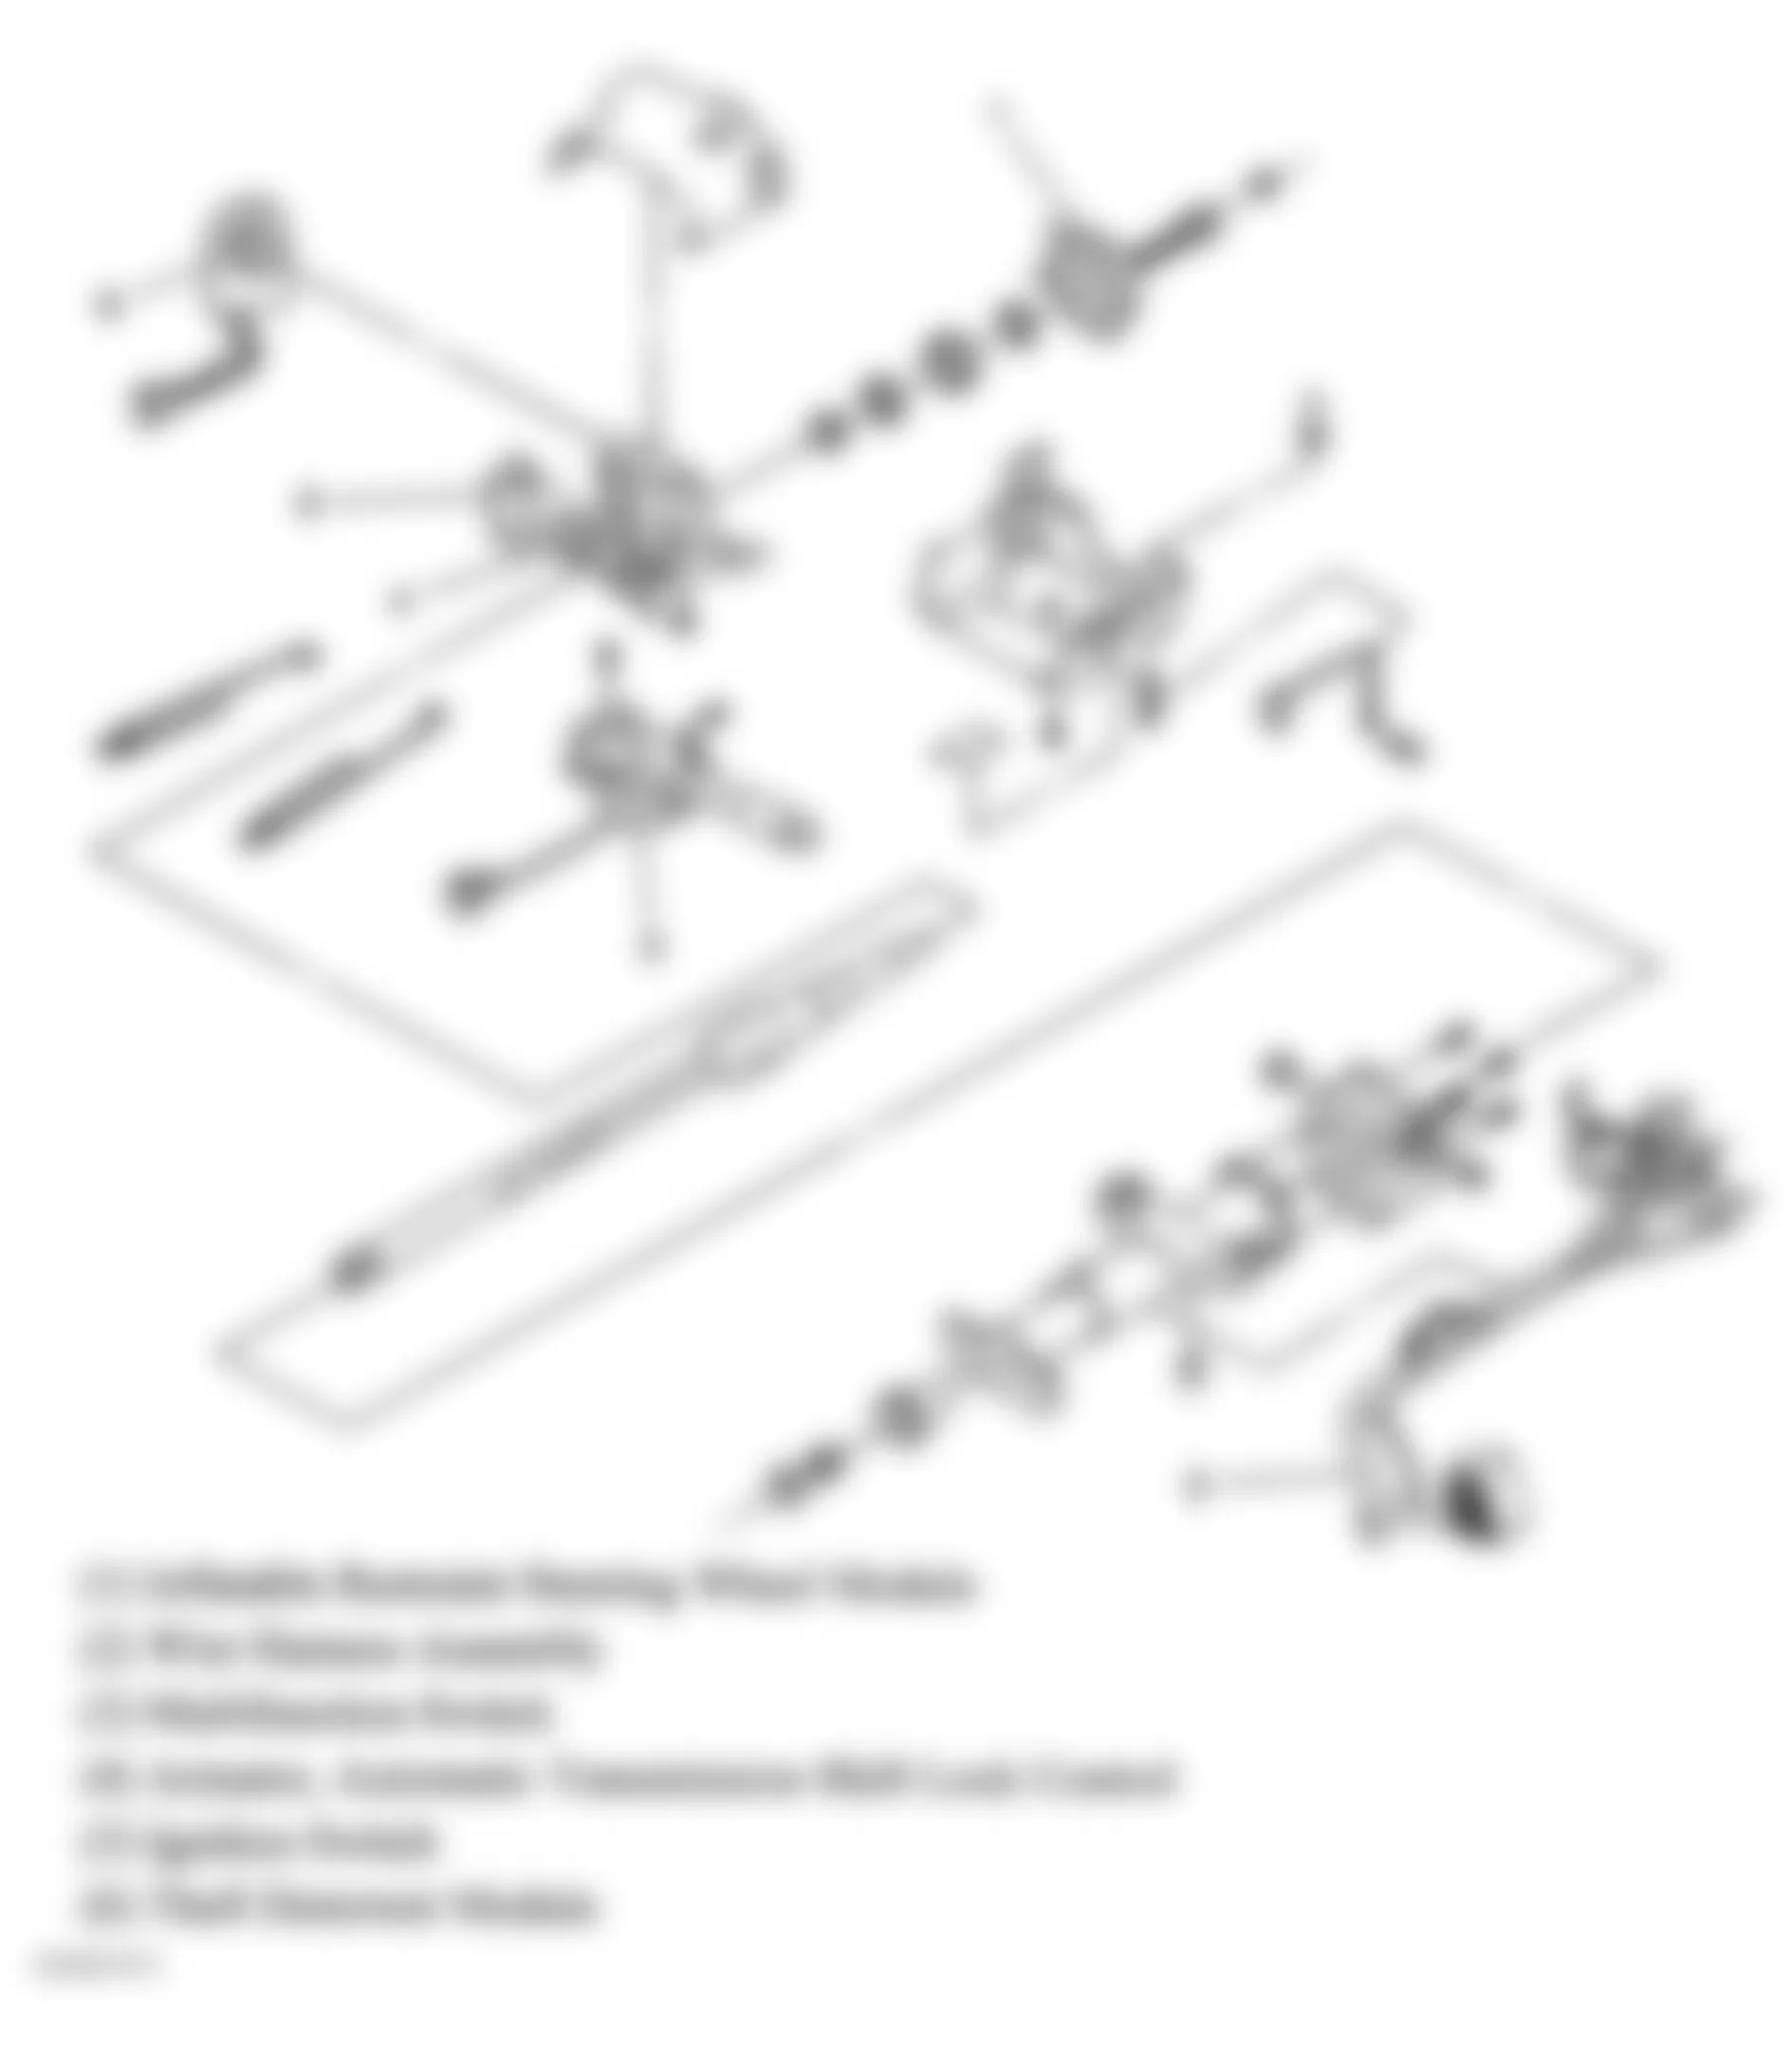 Buick Rendezvous CX 2005 - Component Locations -  Steering Column Disassembled View (Pontiac)